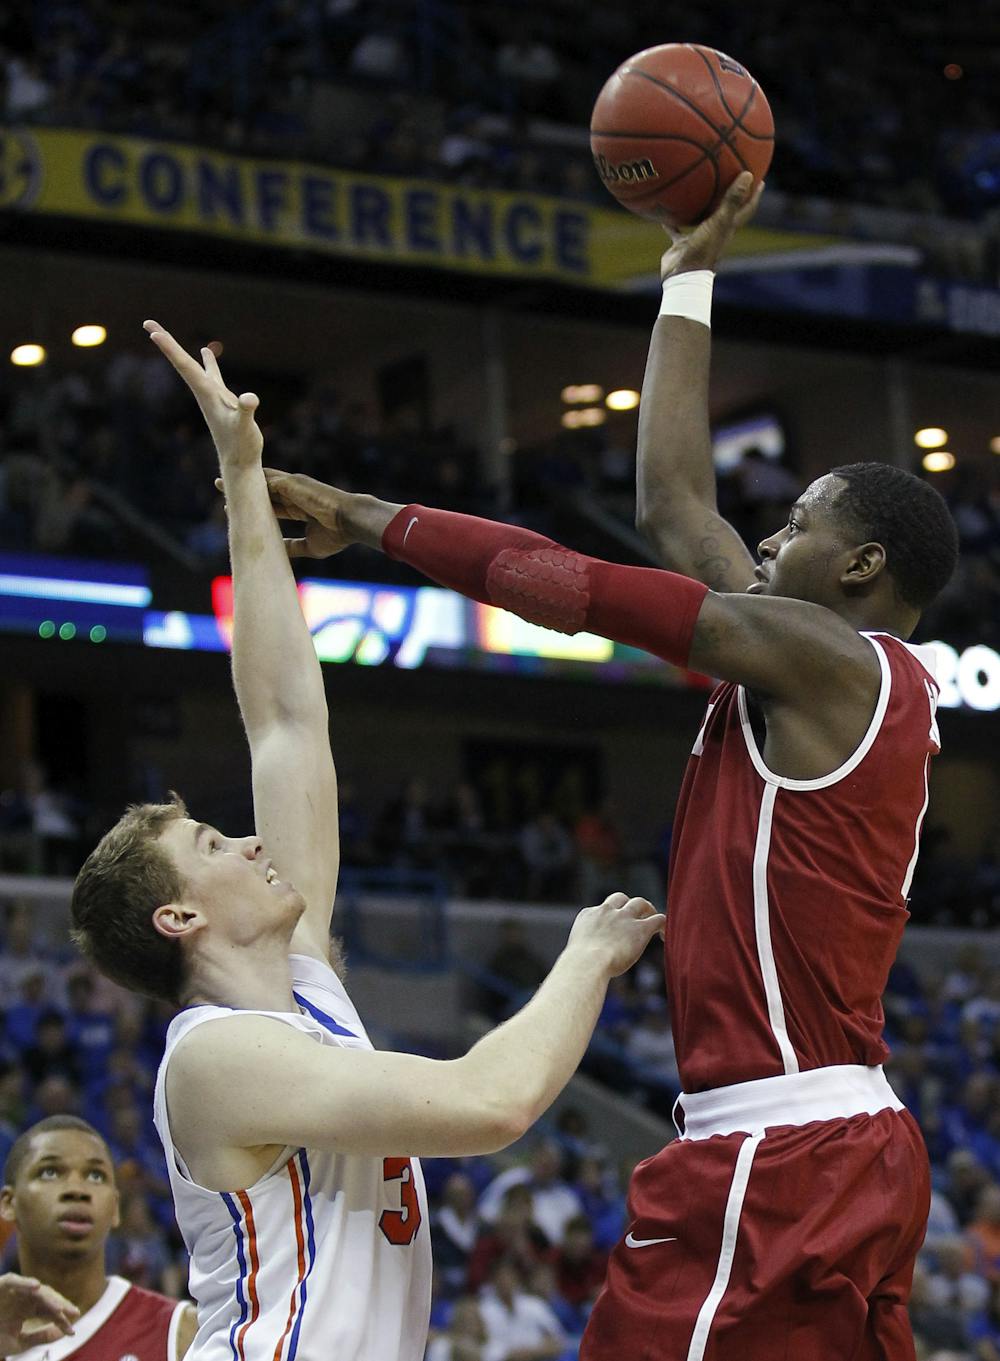 <p>Alabama forward JaMychal Green (1) shoots over Florida's Erik Murphy (33) during the first half of an NCAA college basketball game in the second round of the Southeastern Conference tournament at the New Orleans Arena in New Orleans, Friday, March 9, 2012.</p>